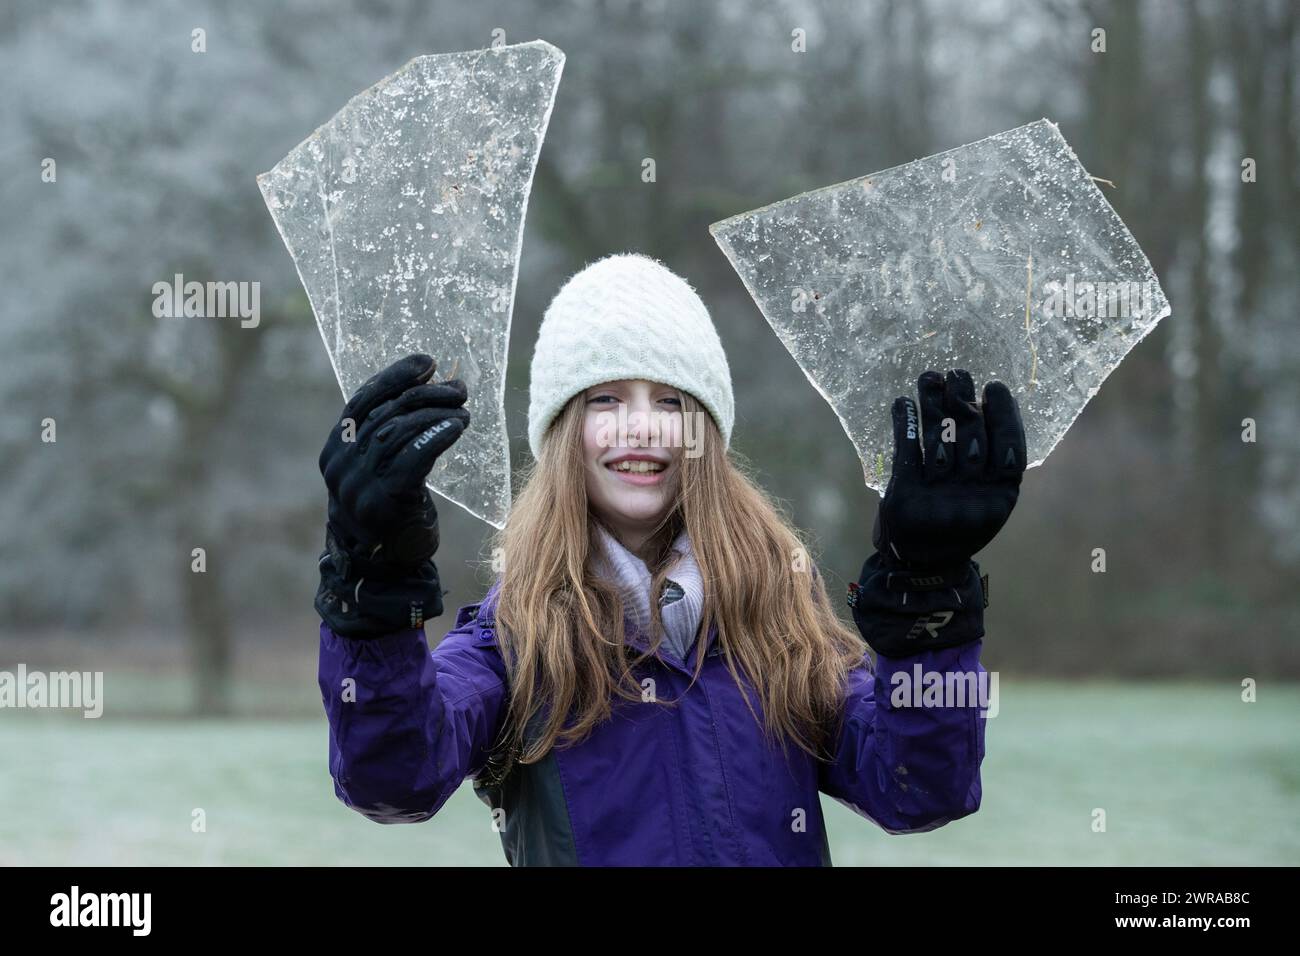 07/01/21   After overnight temperatures plunged well below zero, Freya Kirkpatrick (13), uses her head to smash chunks of ice, collected from frozen p Stock Photo